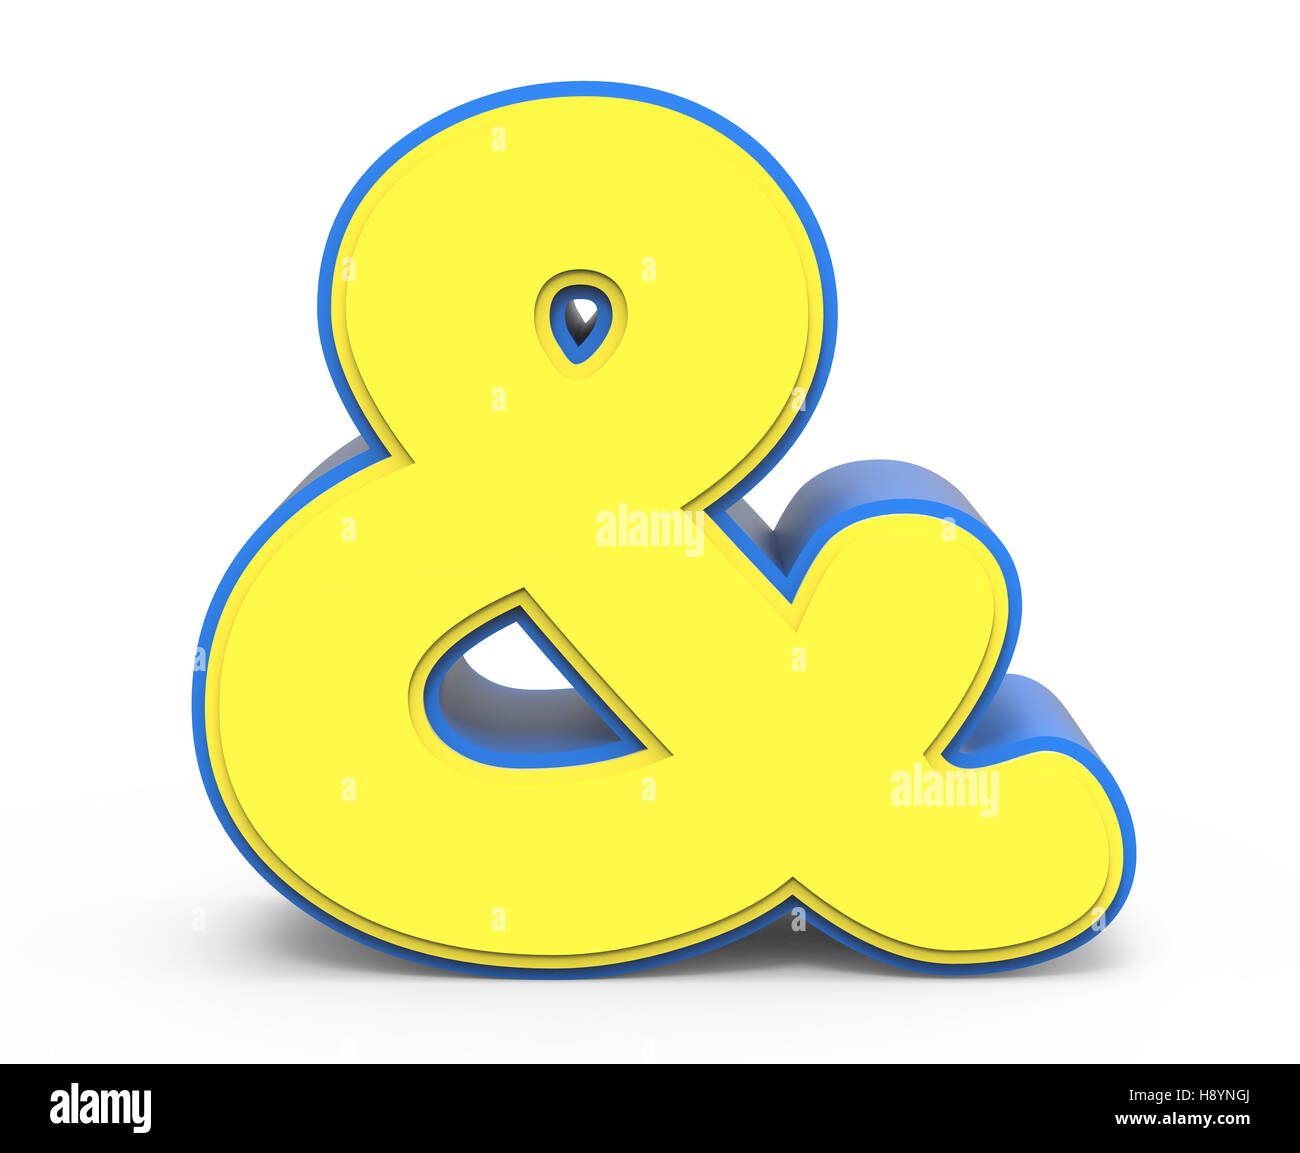 cute yellow And sign, yellow sign with blue frame, toylike sign for design, 3d rendering Stock Photo